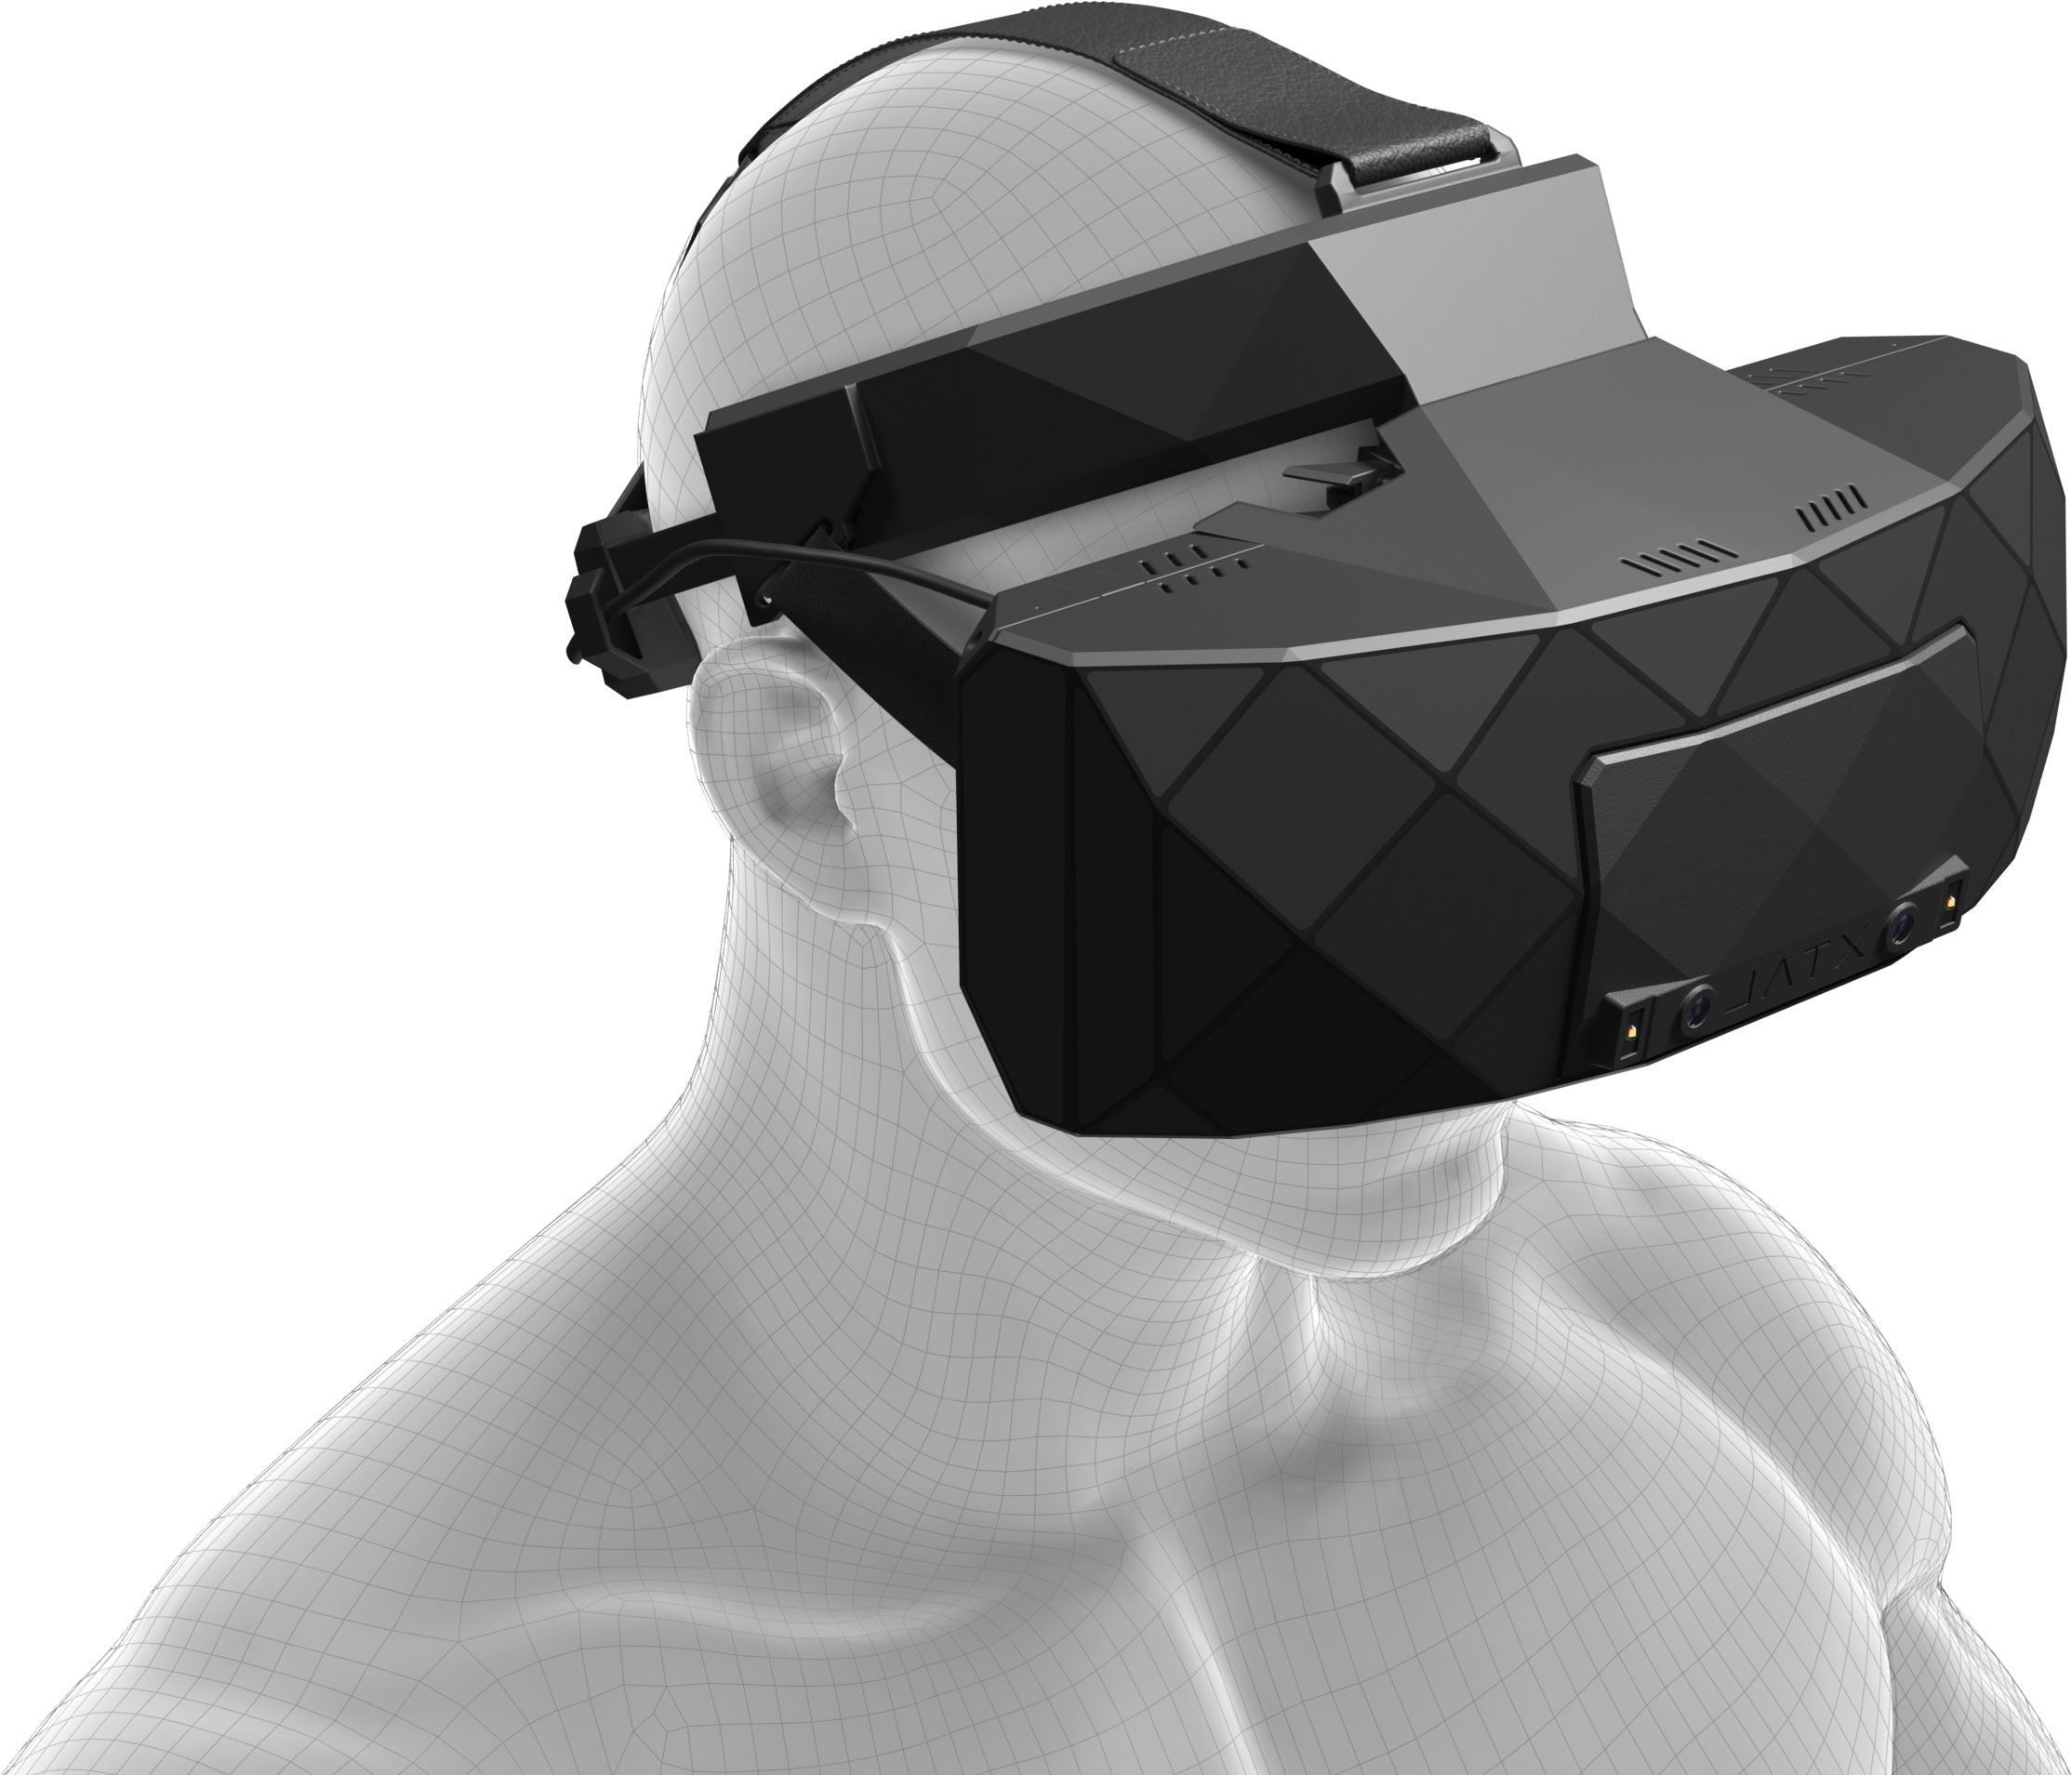 XTAL 3 Virtual Reality headset placed on a dummy - Vrgineers.com